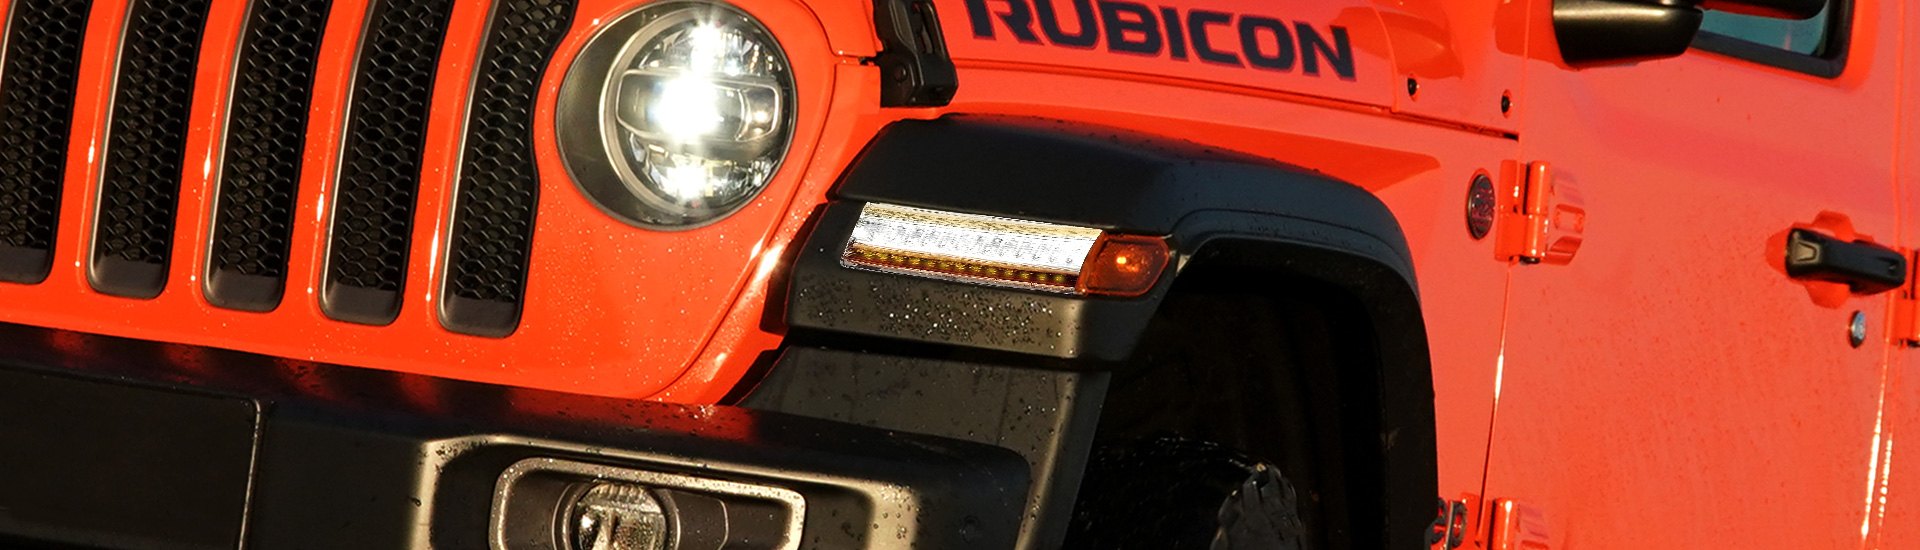 Increase Your Road Visibility With New LED DRLs by Anzo For 2018-2019 Jeep JL